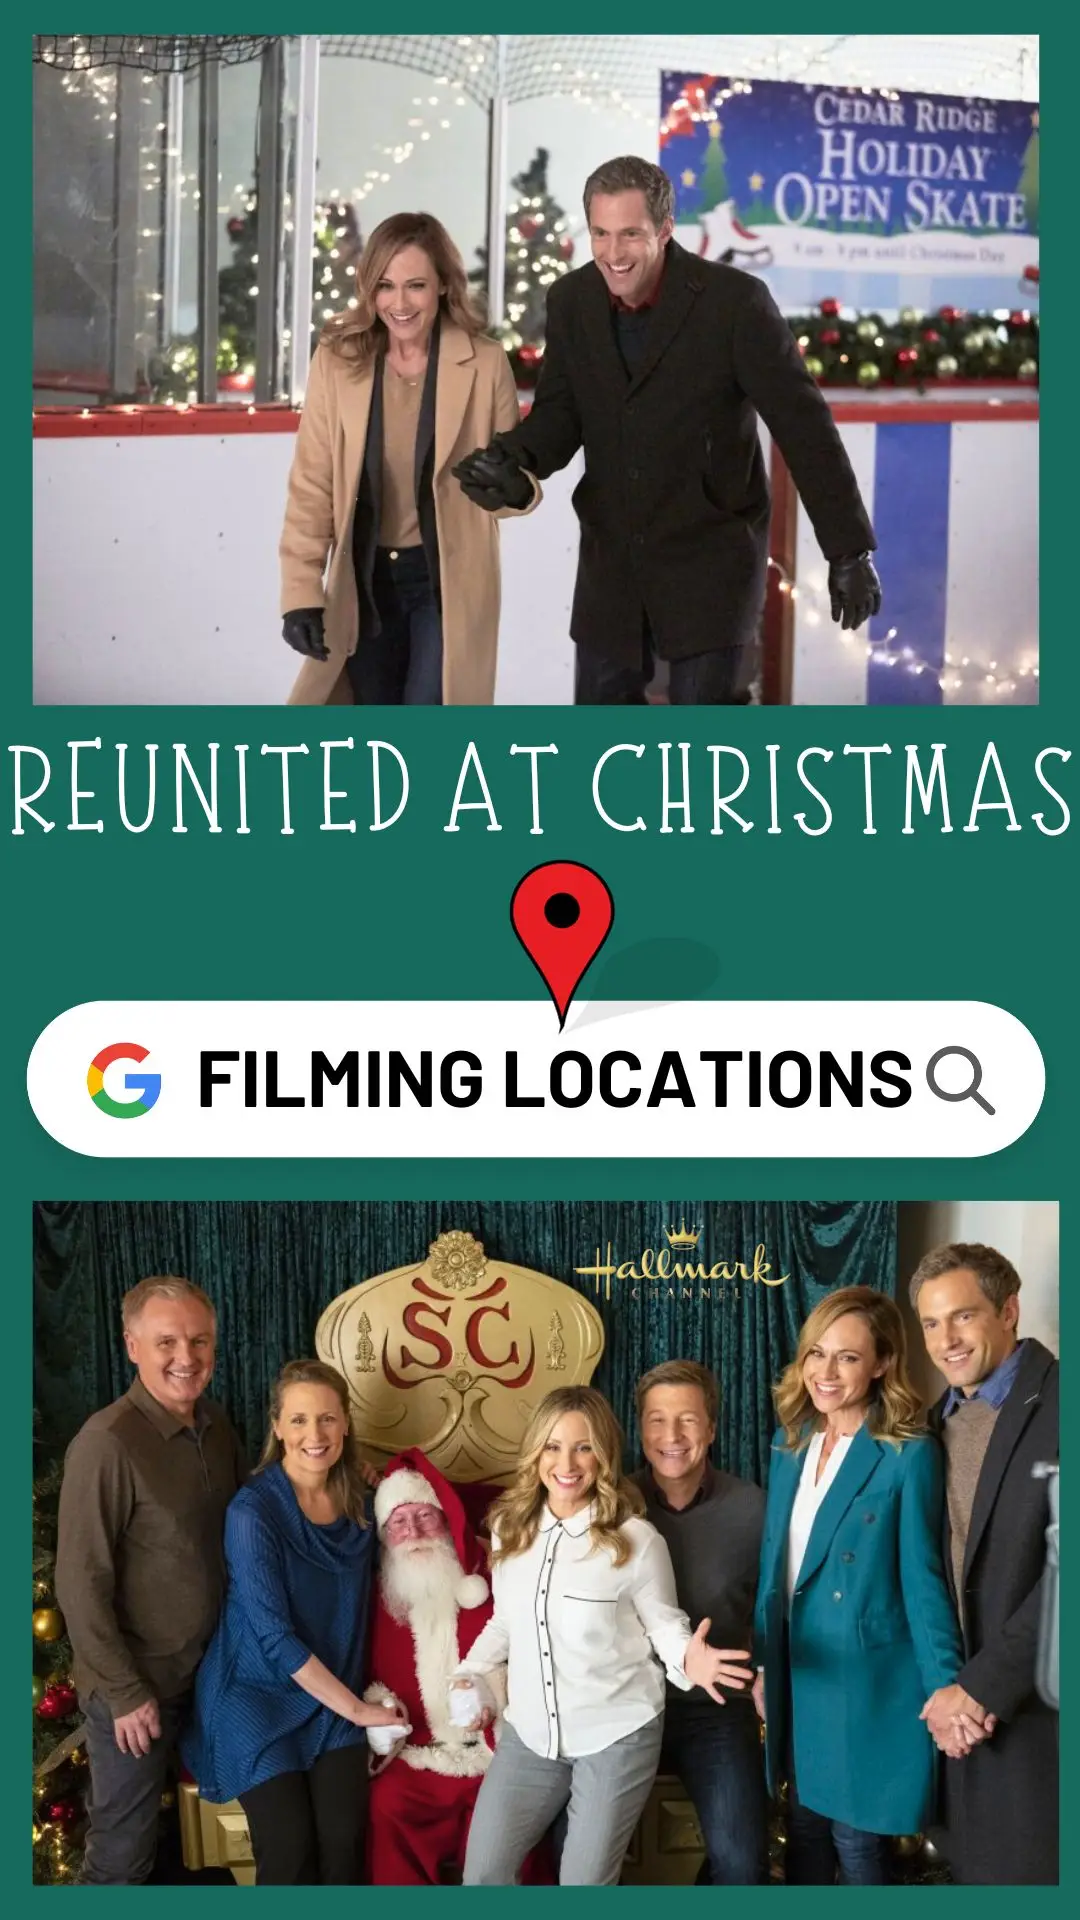 Reunited at Christmas Filming Locations